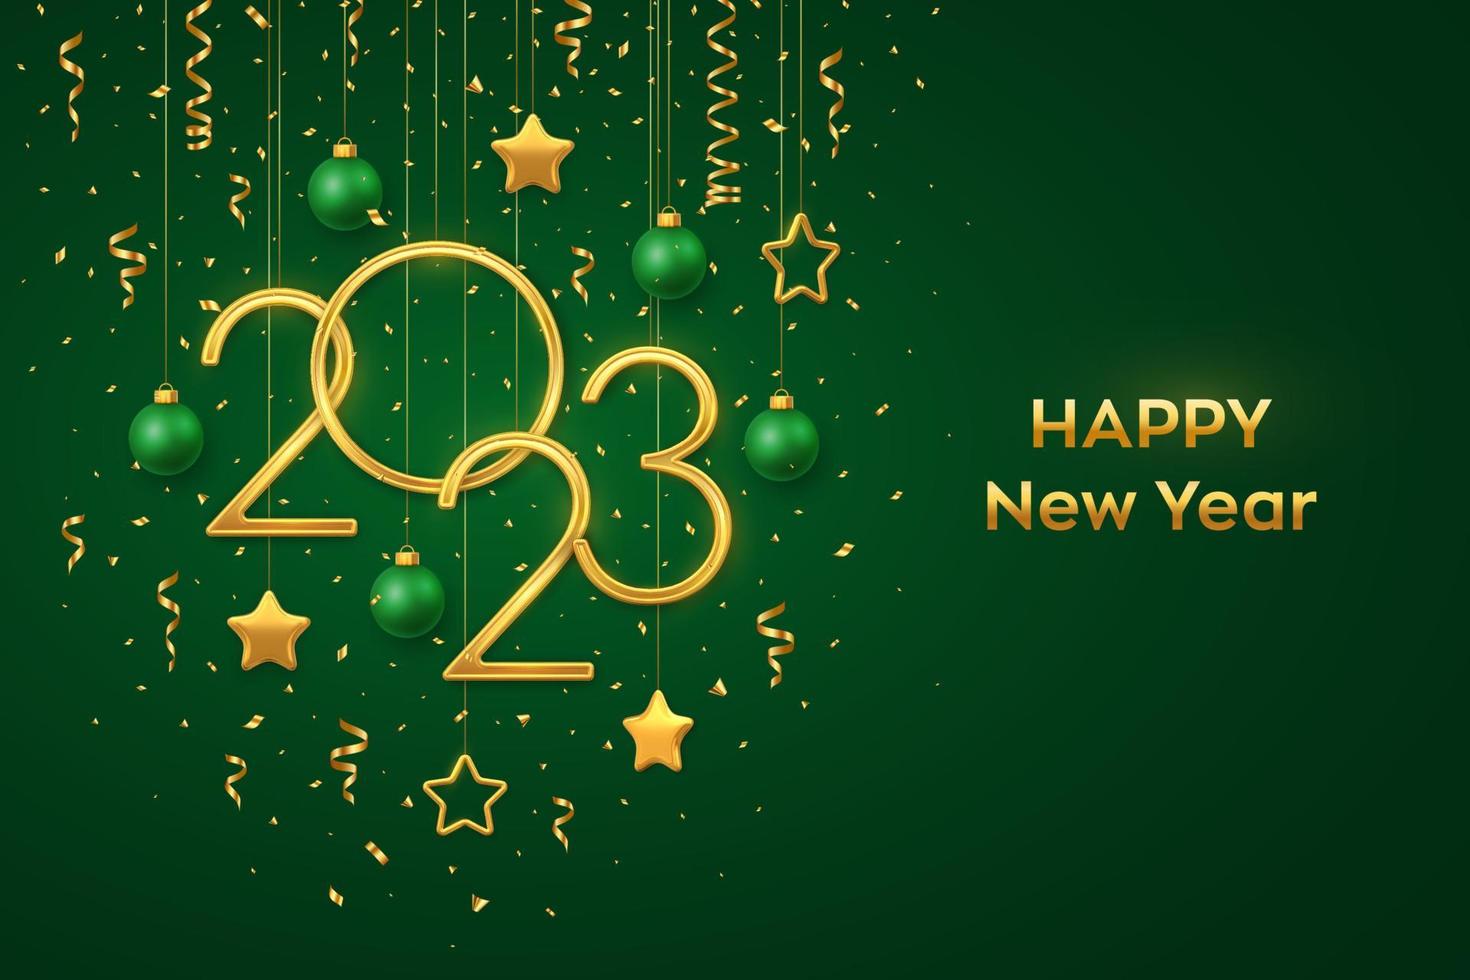 Happy New 2023 Year. Hanging Golden metallic numbers 2023 with shining 3D metallic stars, balls, confetti on green background. New Year greeting card, banner template. Realistic Vector illustration.